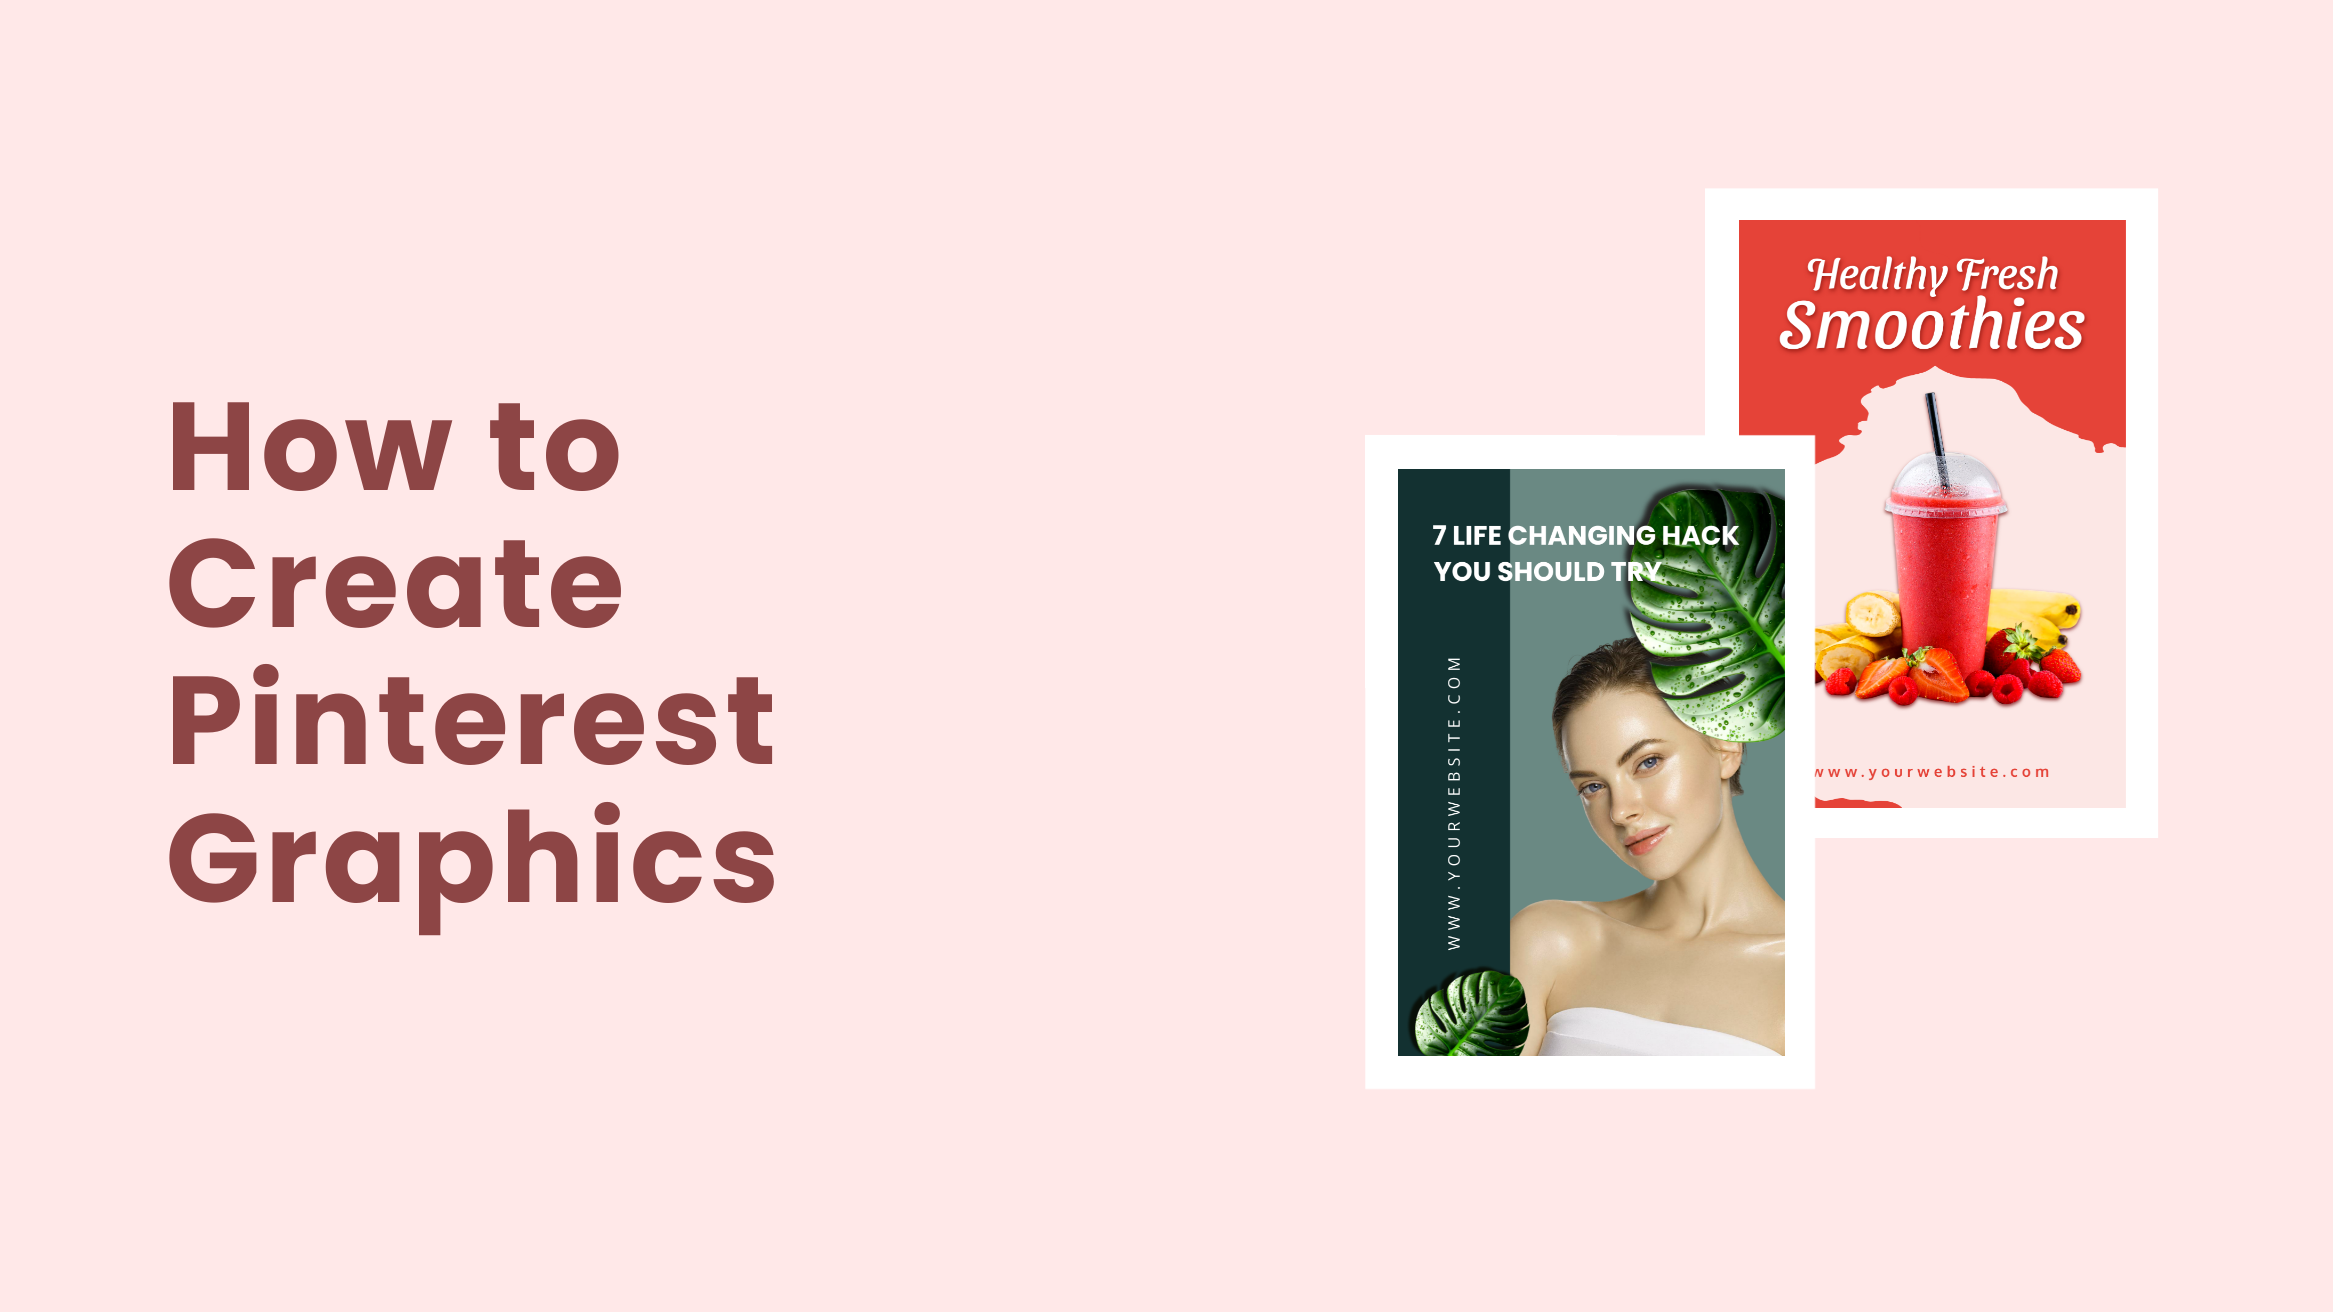 How to Create Pinterest Graphics